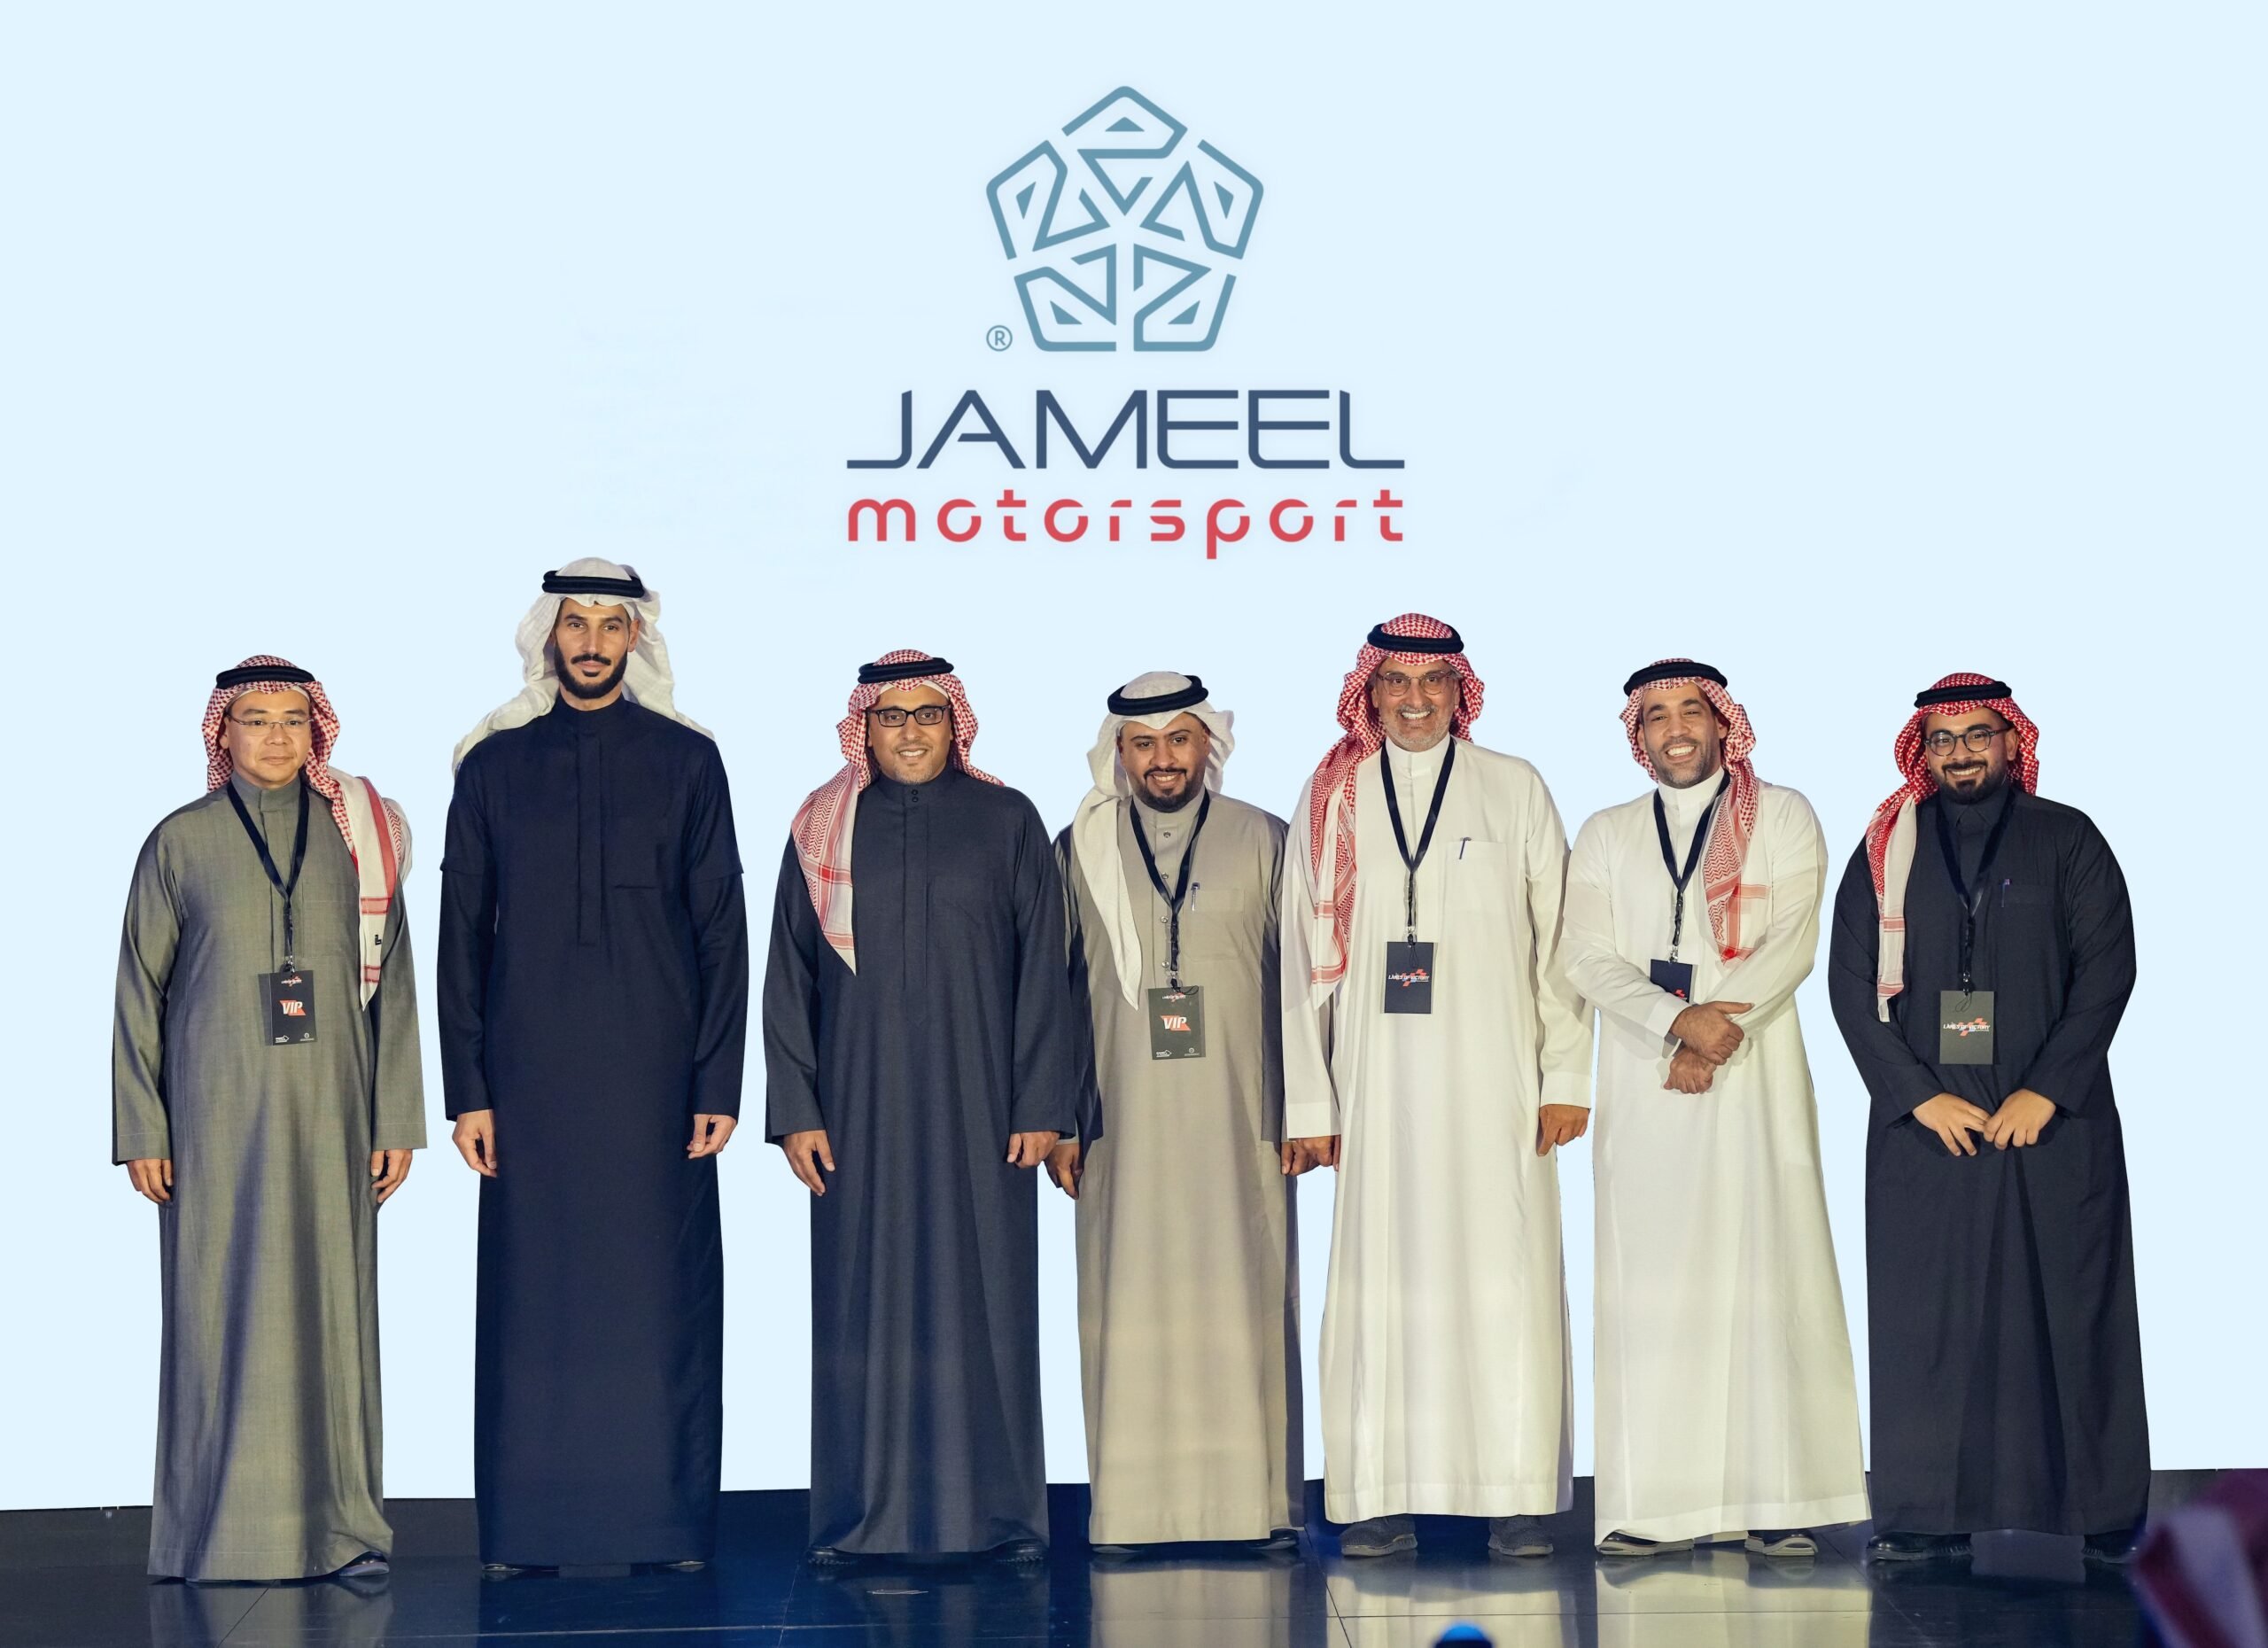 26 years of supporting Motorsports culminates in formation of Jameel Motorsport